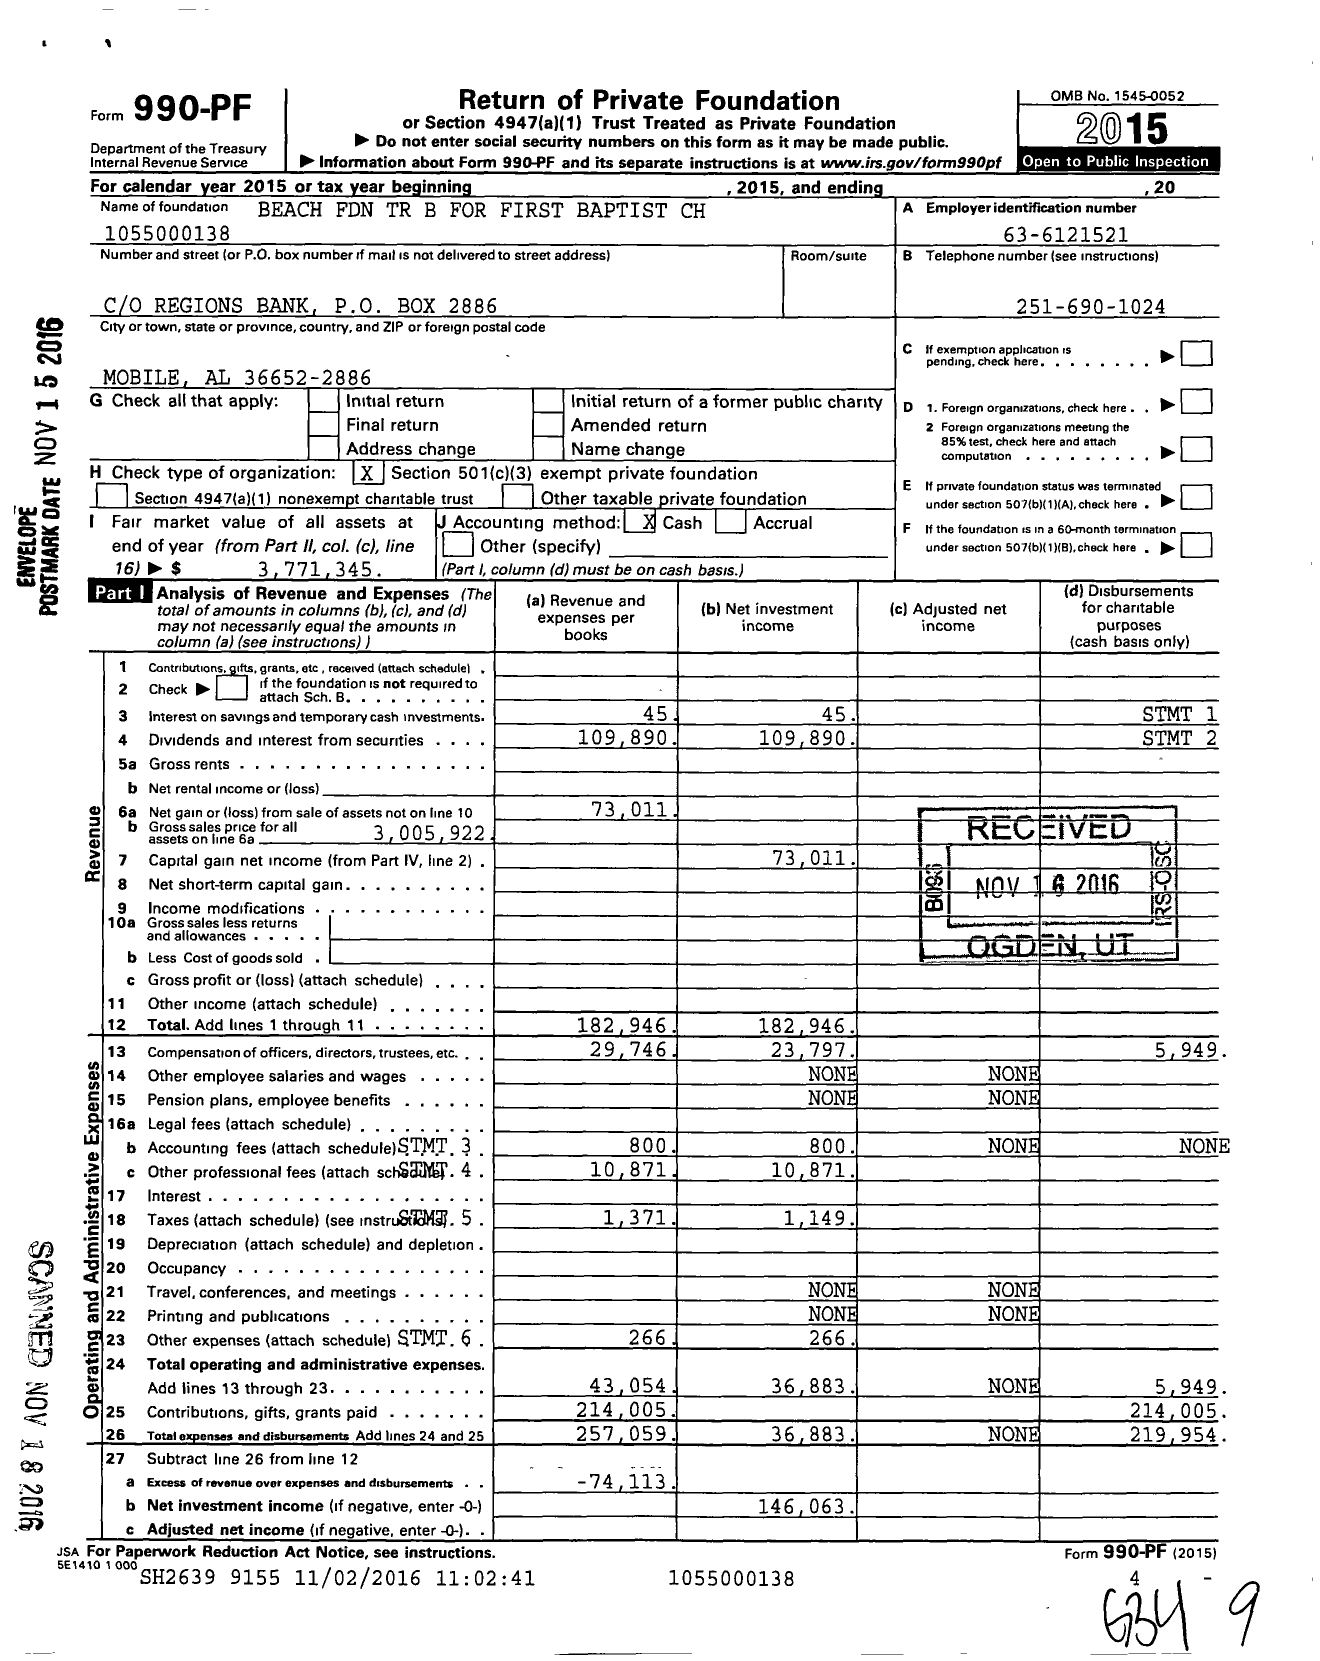 Image of first page of 2015 Form 990PF for Beach Foundation TR B for First Baptist CH